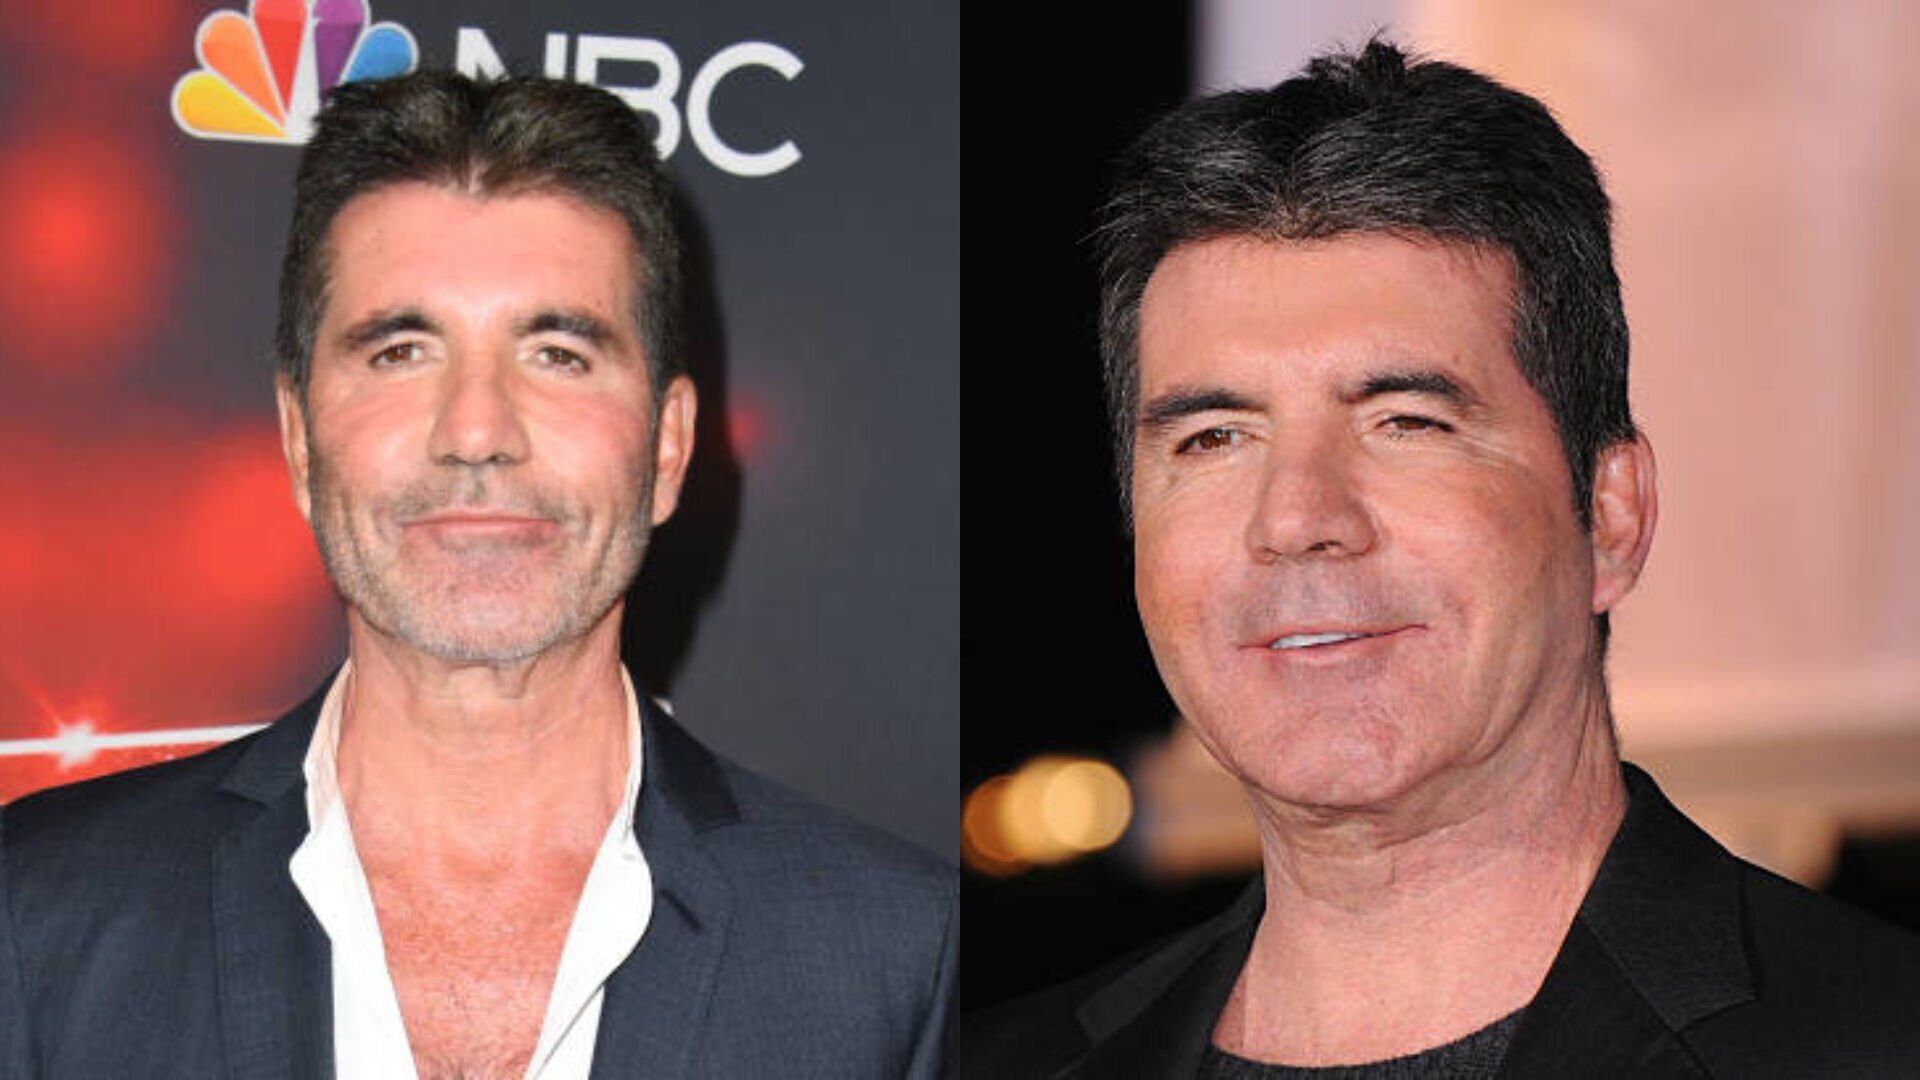 Simon Cowell removes face filler after admitting he went 'too far'